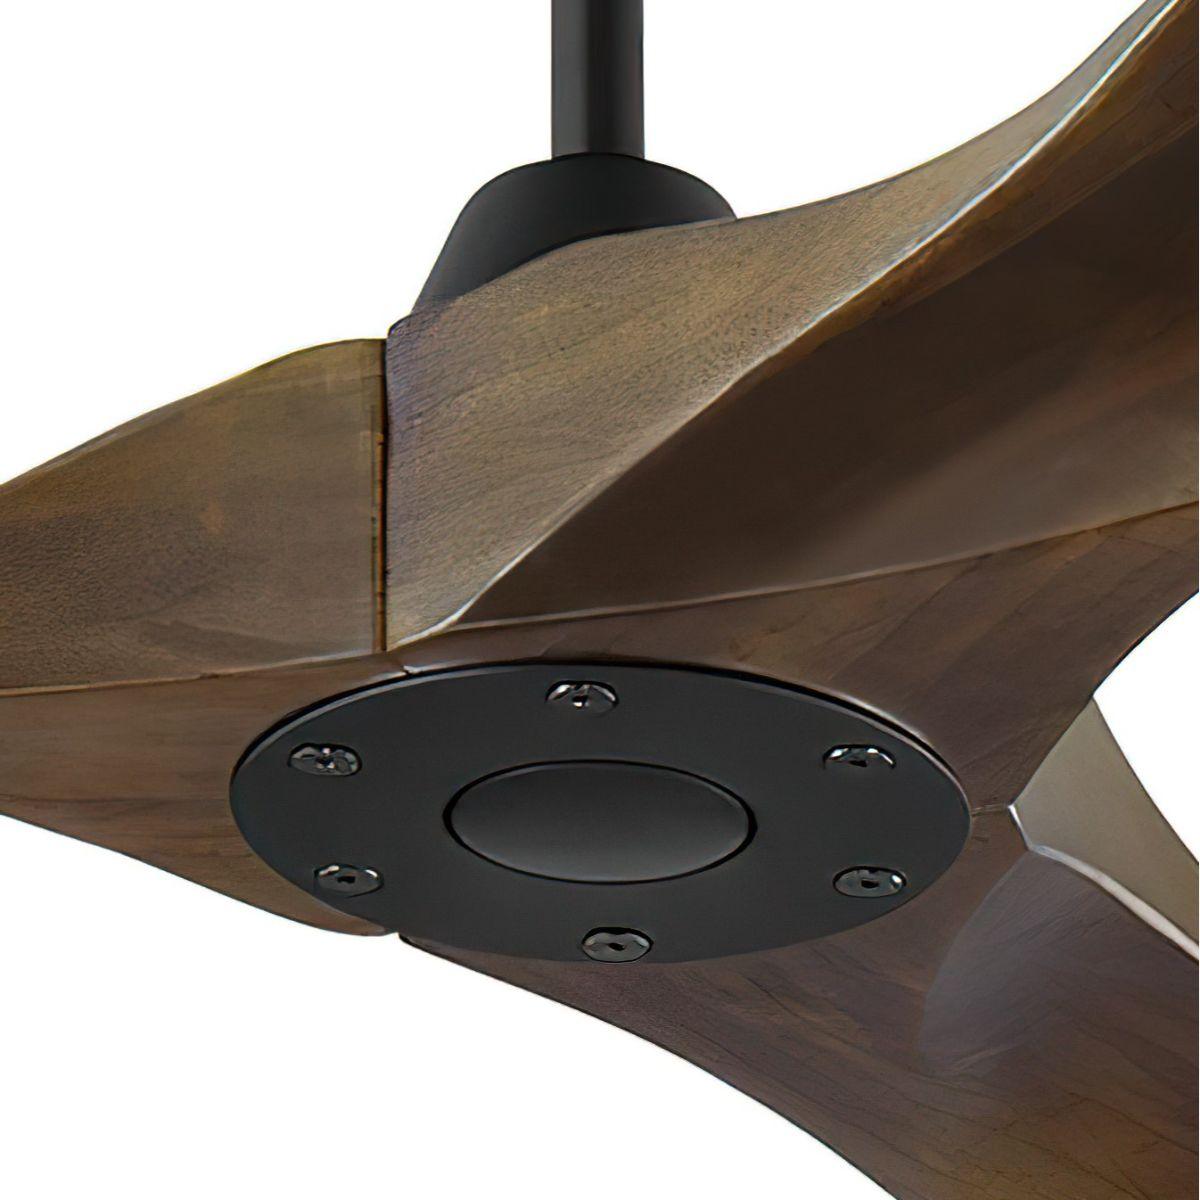 Maverick Max 70 Inch Modern Large Propeller Outdoor Ceiling Fan With Remote